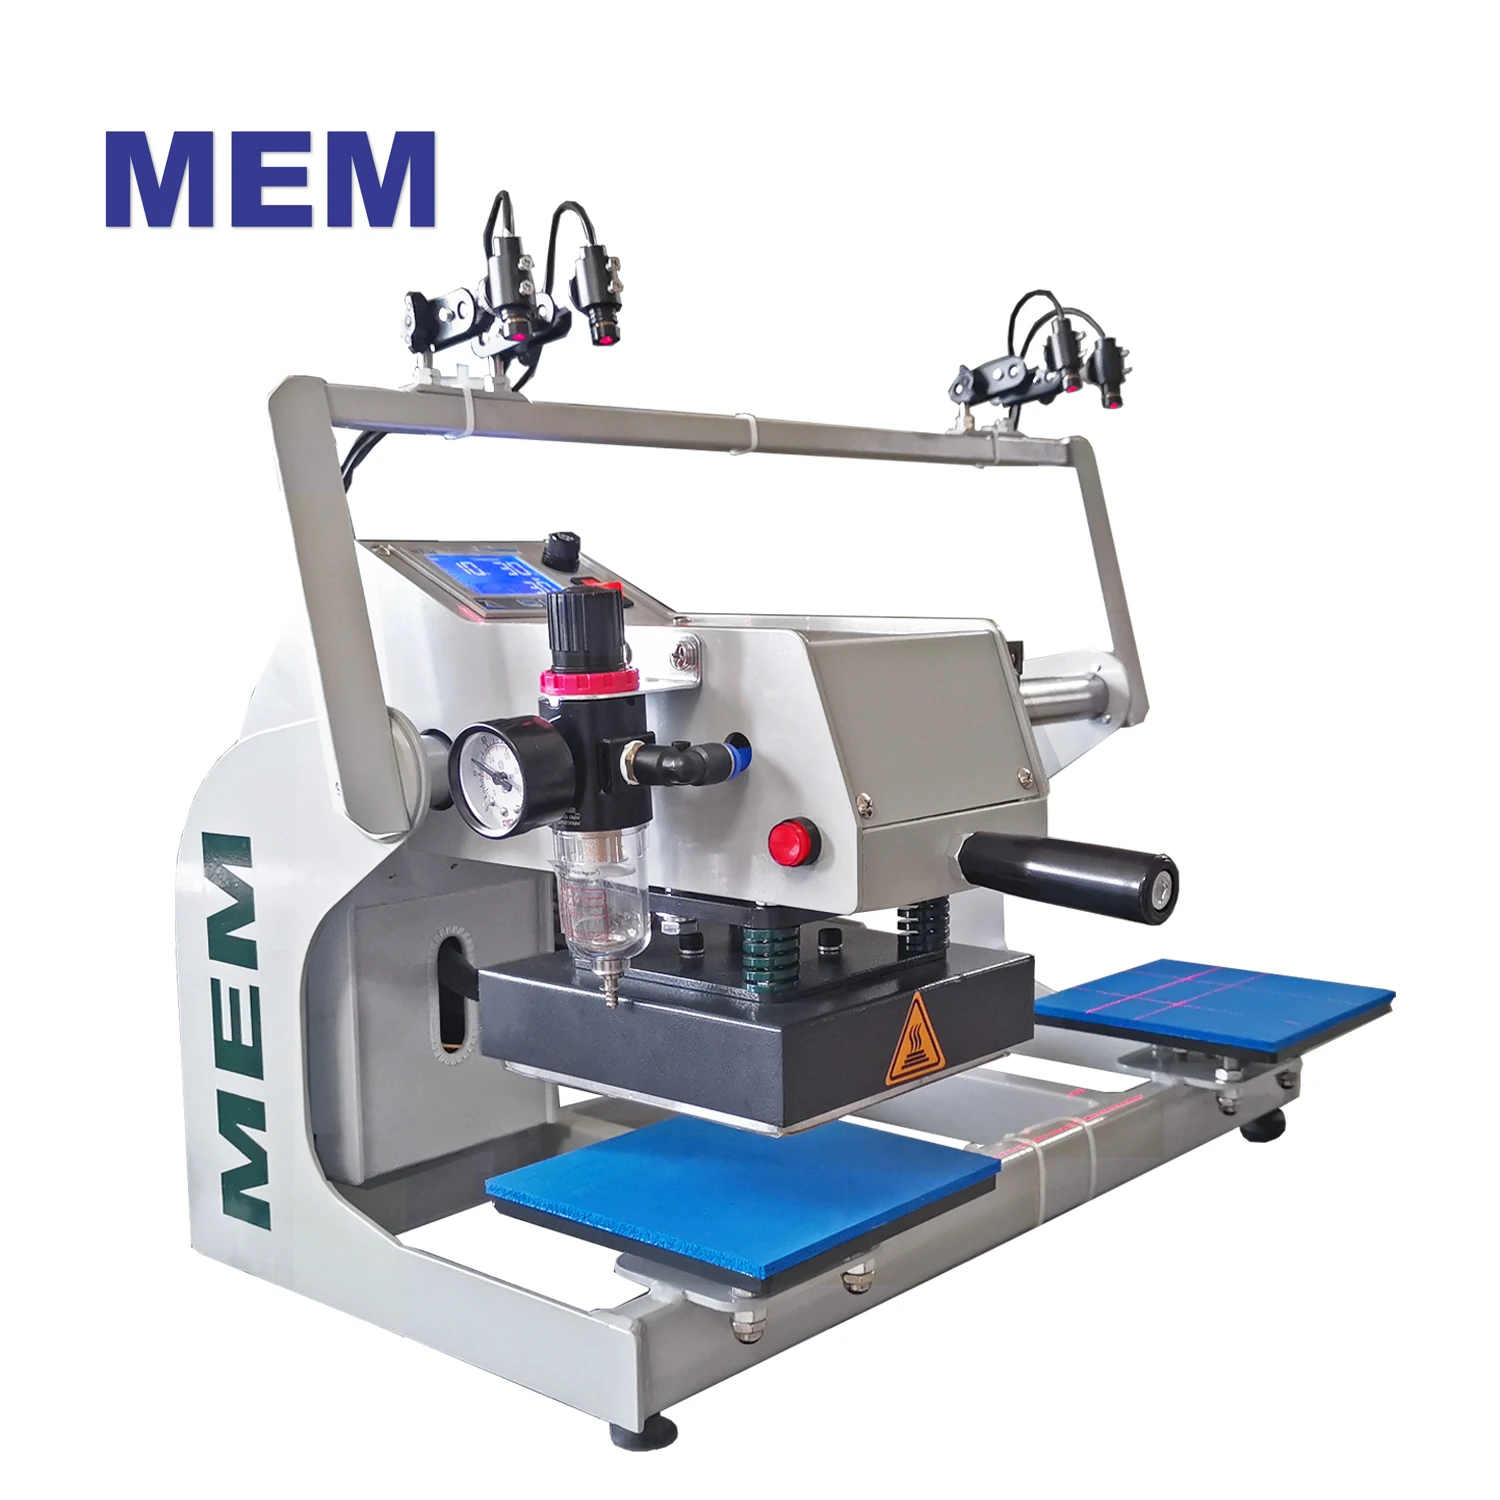 

MEM 15x15 cm small automatic T shirt heat press machine from US warehouse fast delivery with red laser light